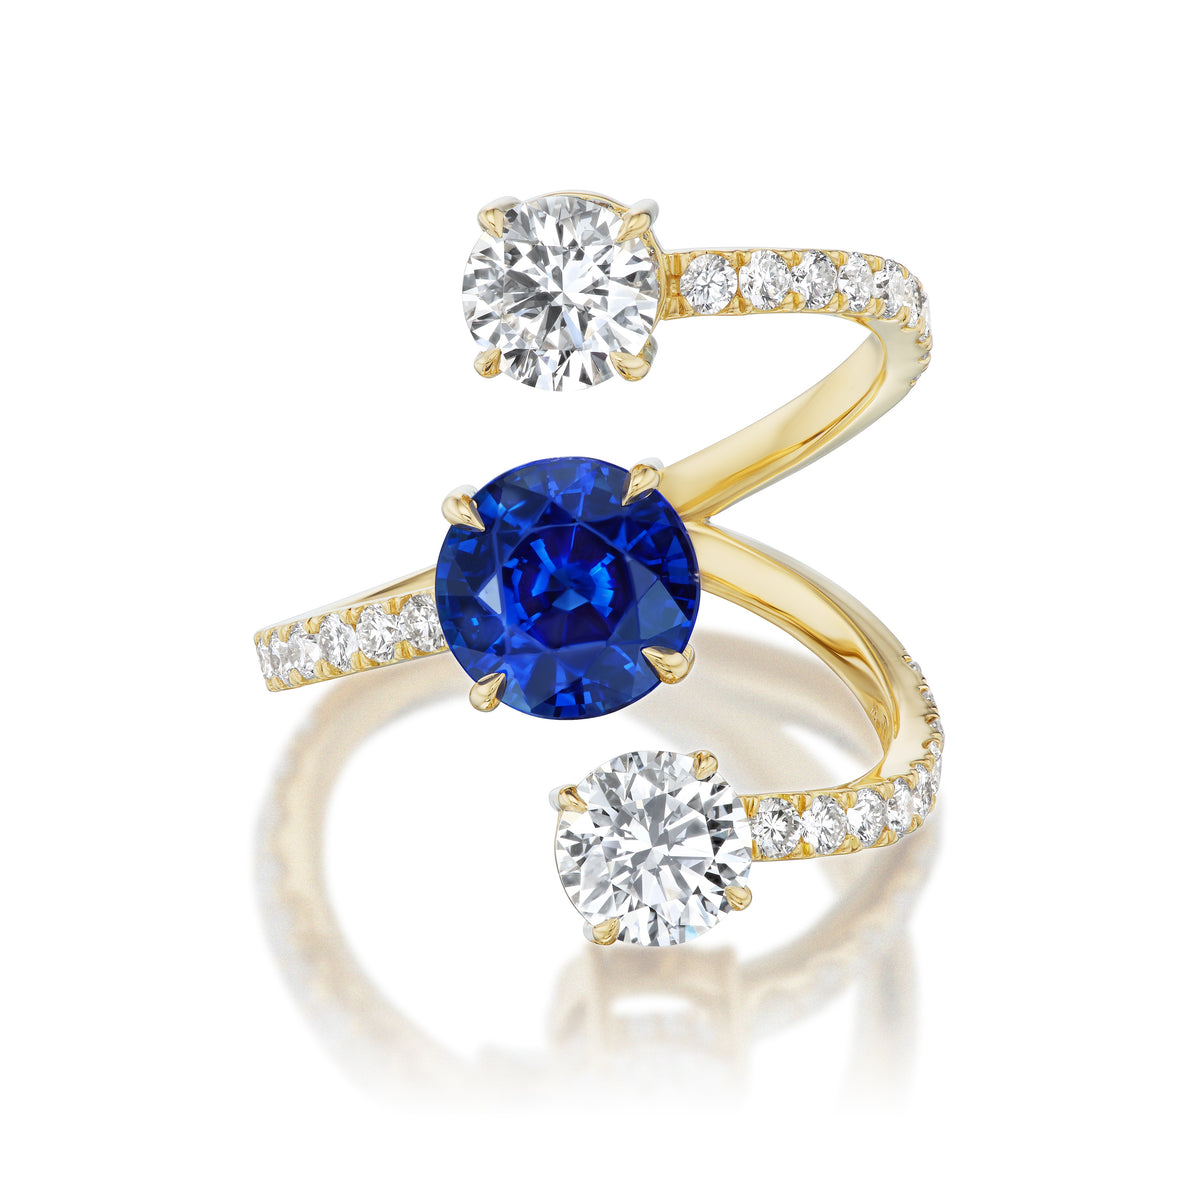 Wraparound Ring in Yellow Gold with Round Brilliant Sapphire, Diamonds, and Pavé Band